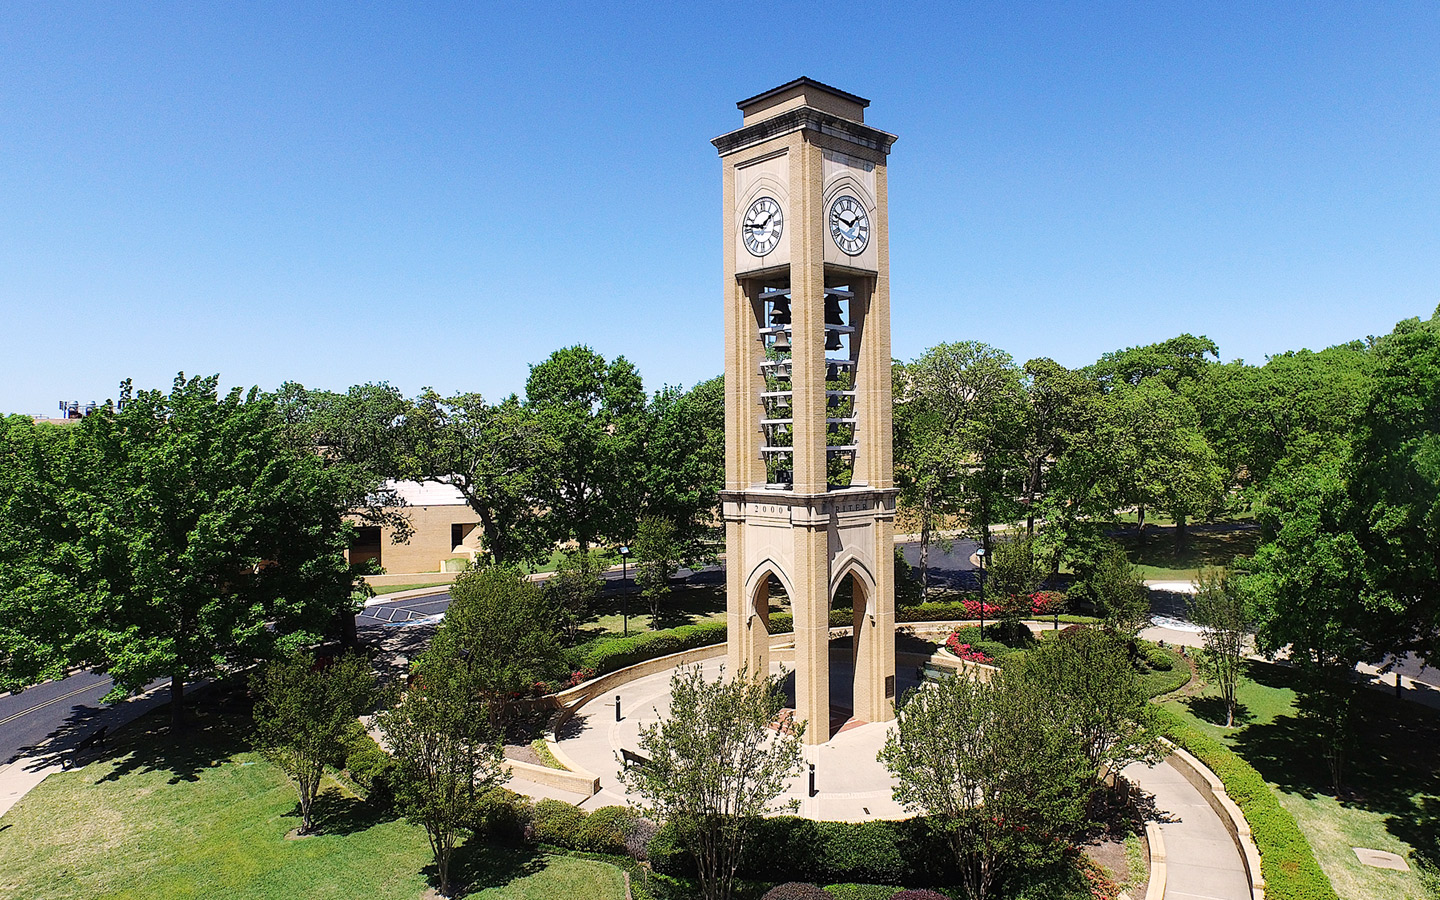 UT Tyler bell tower on a bright day